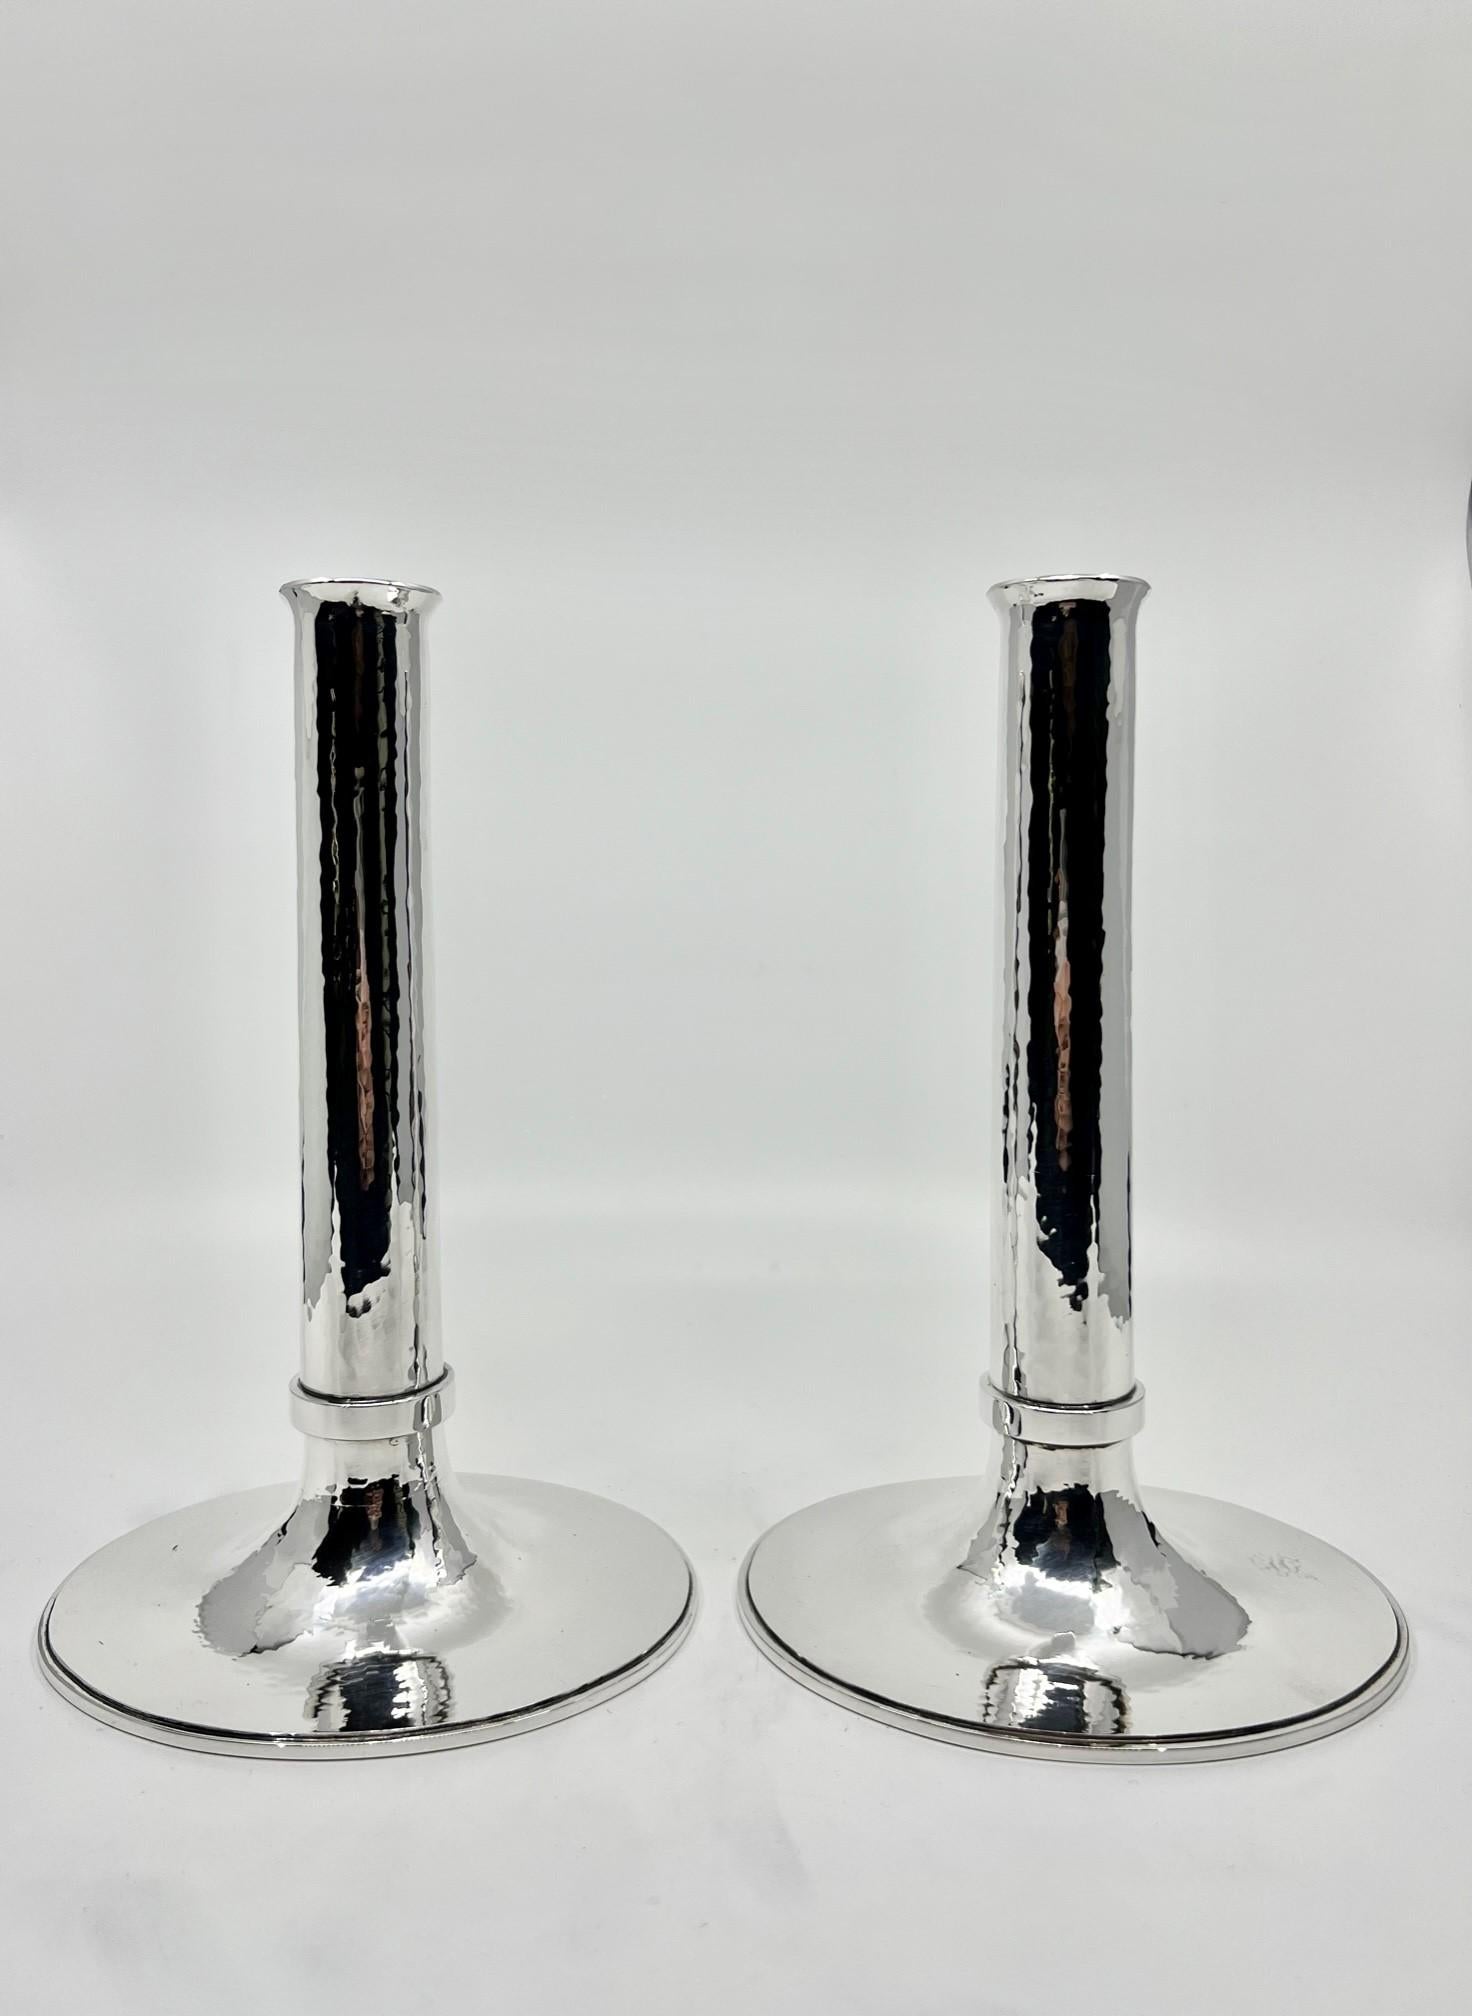 A pair of new handcrafted sterling silver candlesticks, designed and produced by Greg Pepin Silver and contemporary Copenhagen silversmith Manuel Sjodahl Andersen. Unlike a filled candlestick, these are hollow made with a heavy gauged silver. These